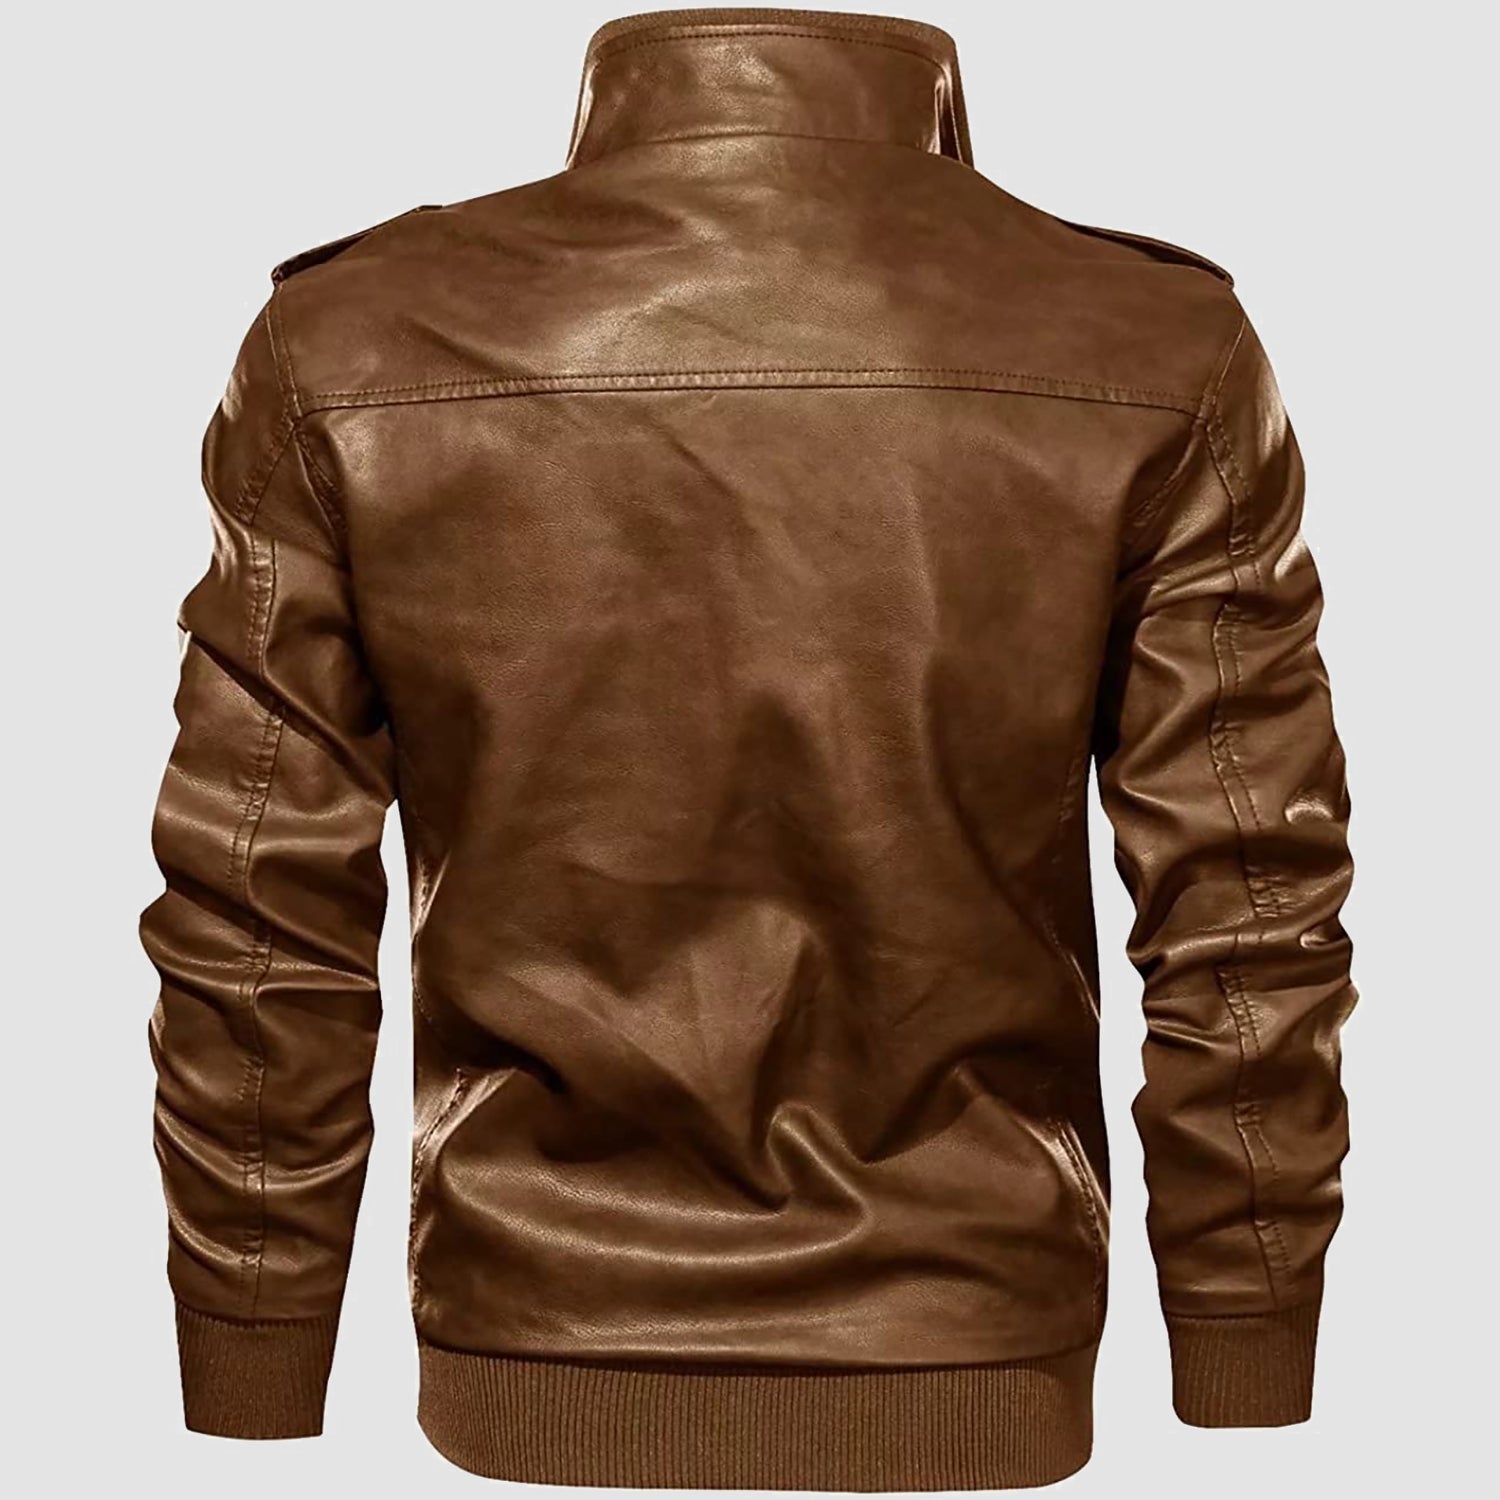 Men's Vintage Pu Faux Leather Jacket with 6 Pockets Stand Collar